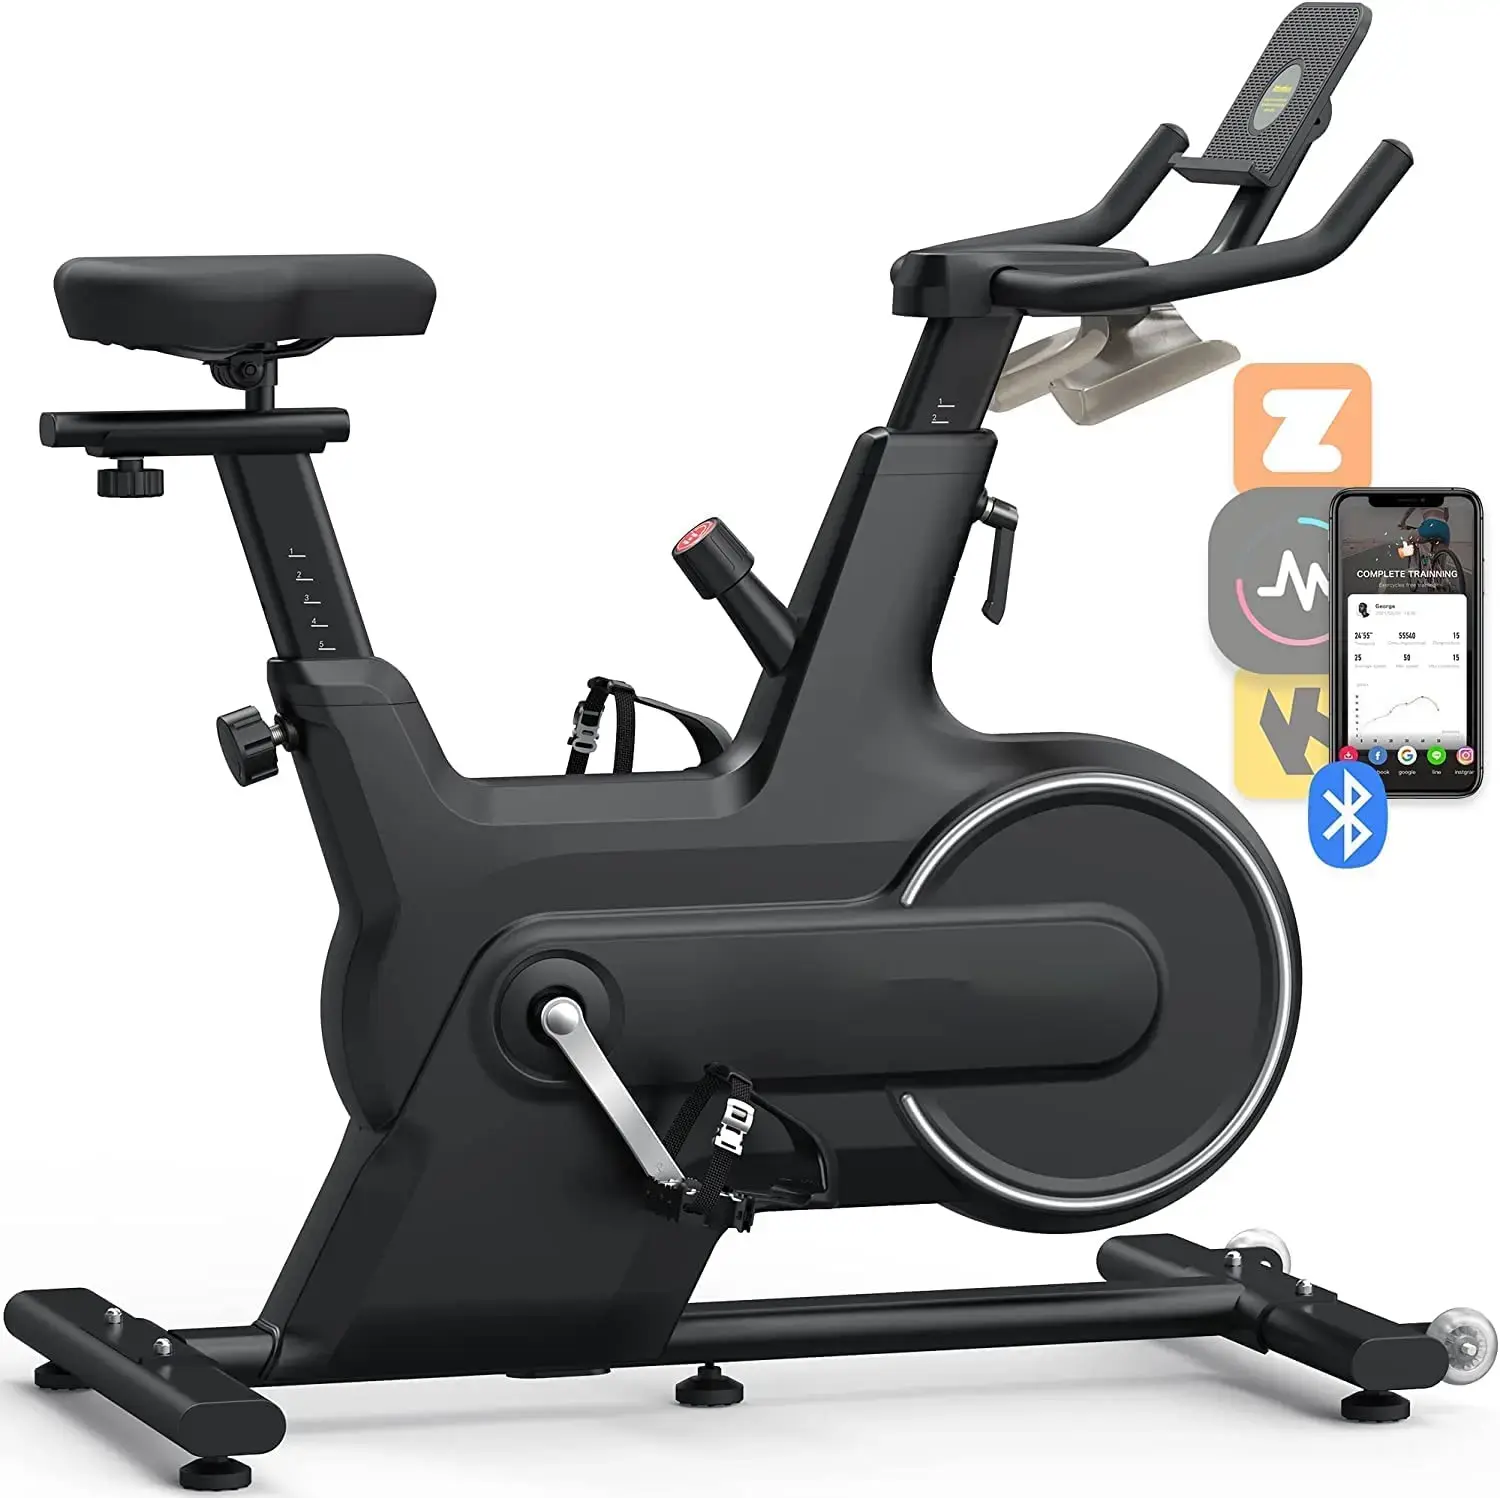 Indoor Cycling Bike, Exercise Bike for Home with Resistance, Bluetooth Stationary Bike, iPad Holder